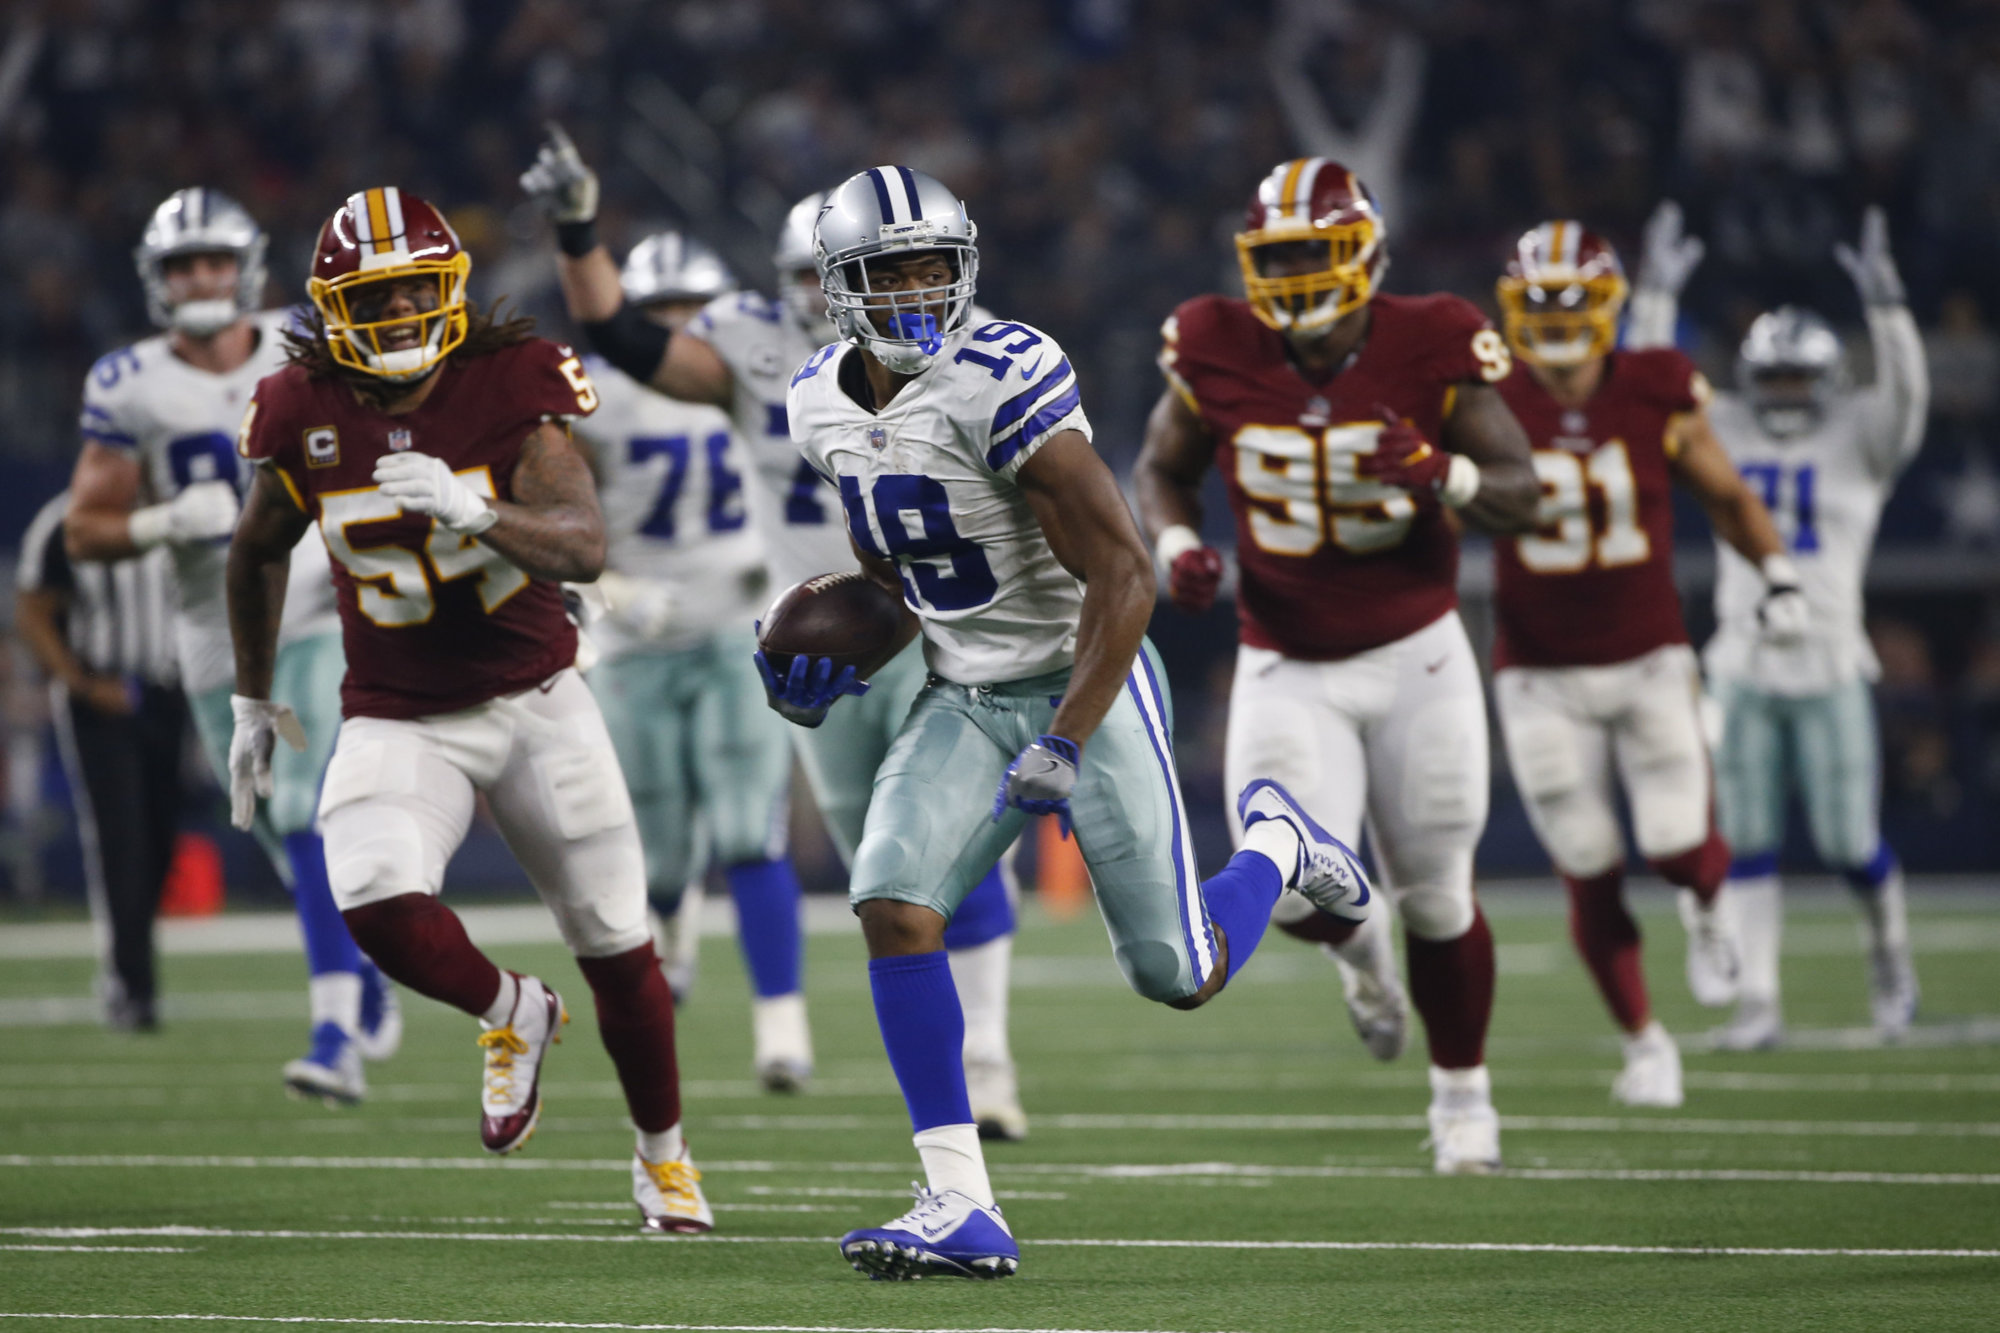 Dallas Cowboys wide receiver Amari Cooper (19) runs in for a touchdown against the Washington Redskins during the second half of an NFL football game in Arlington, Texas, Thursday, Nov. 22, 2018. (AP Photo/Ron Jenkins)